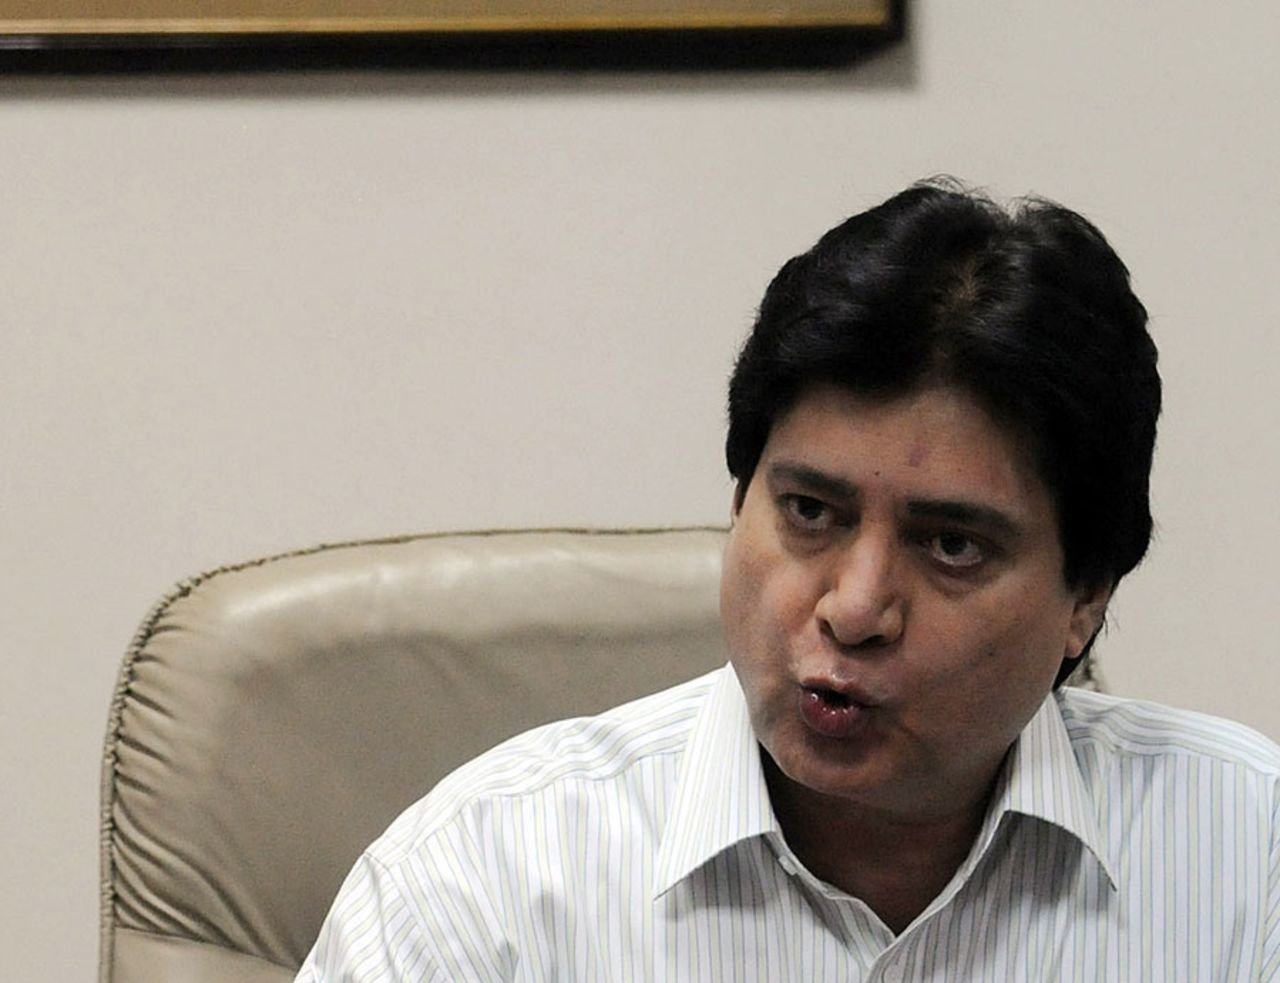 Mohsin Khan, PCB's chief selector, speaks to the press in Karachi, Pakistan, October 20, 2010